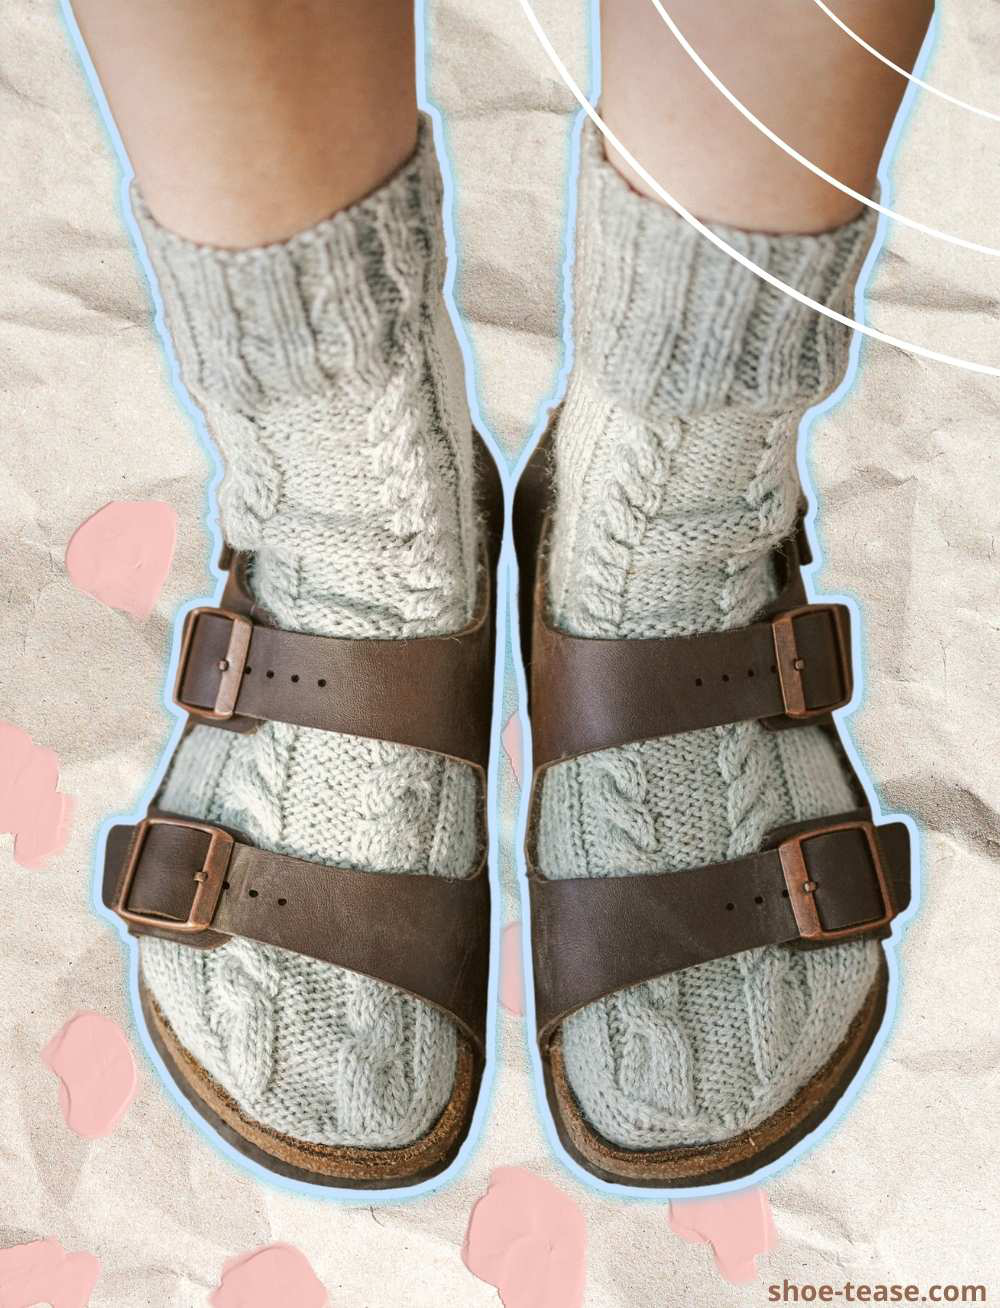 White socks with shoes and sandals, the trend you either love or hate, Culture